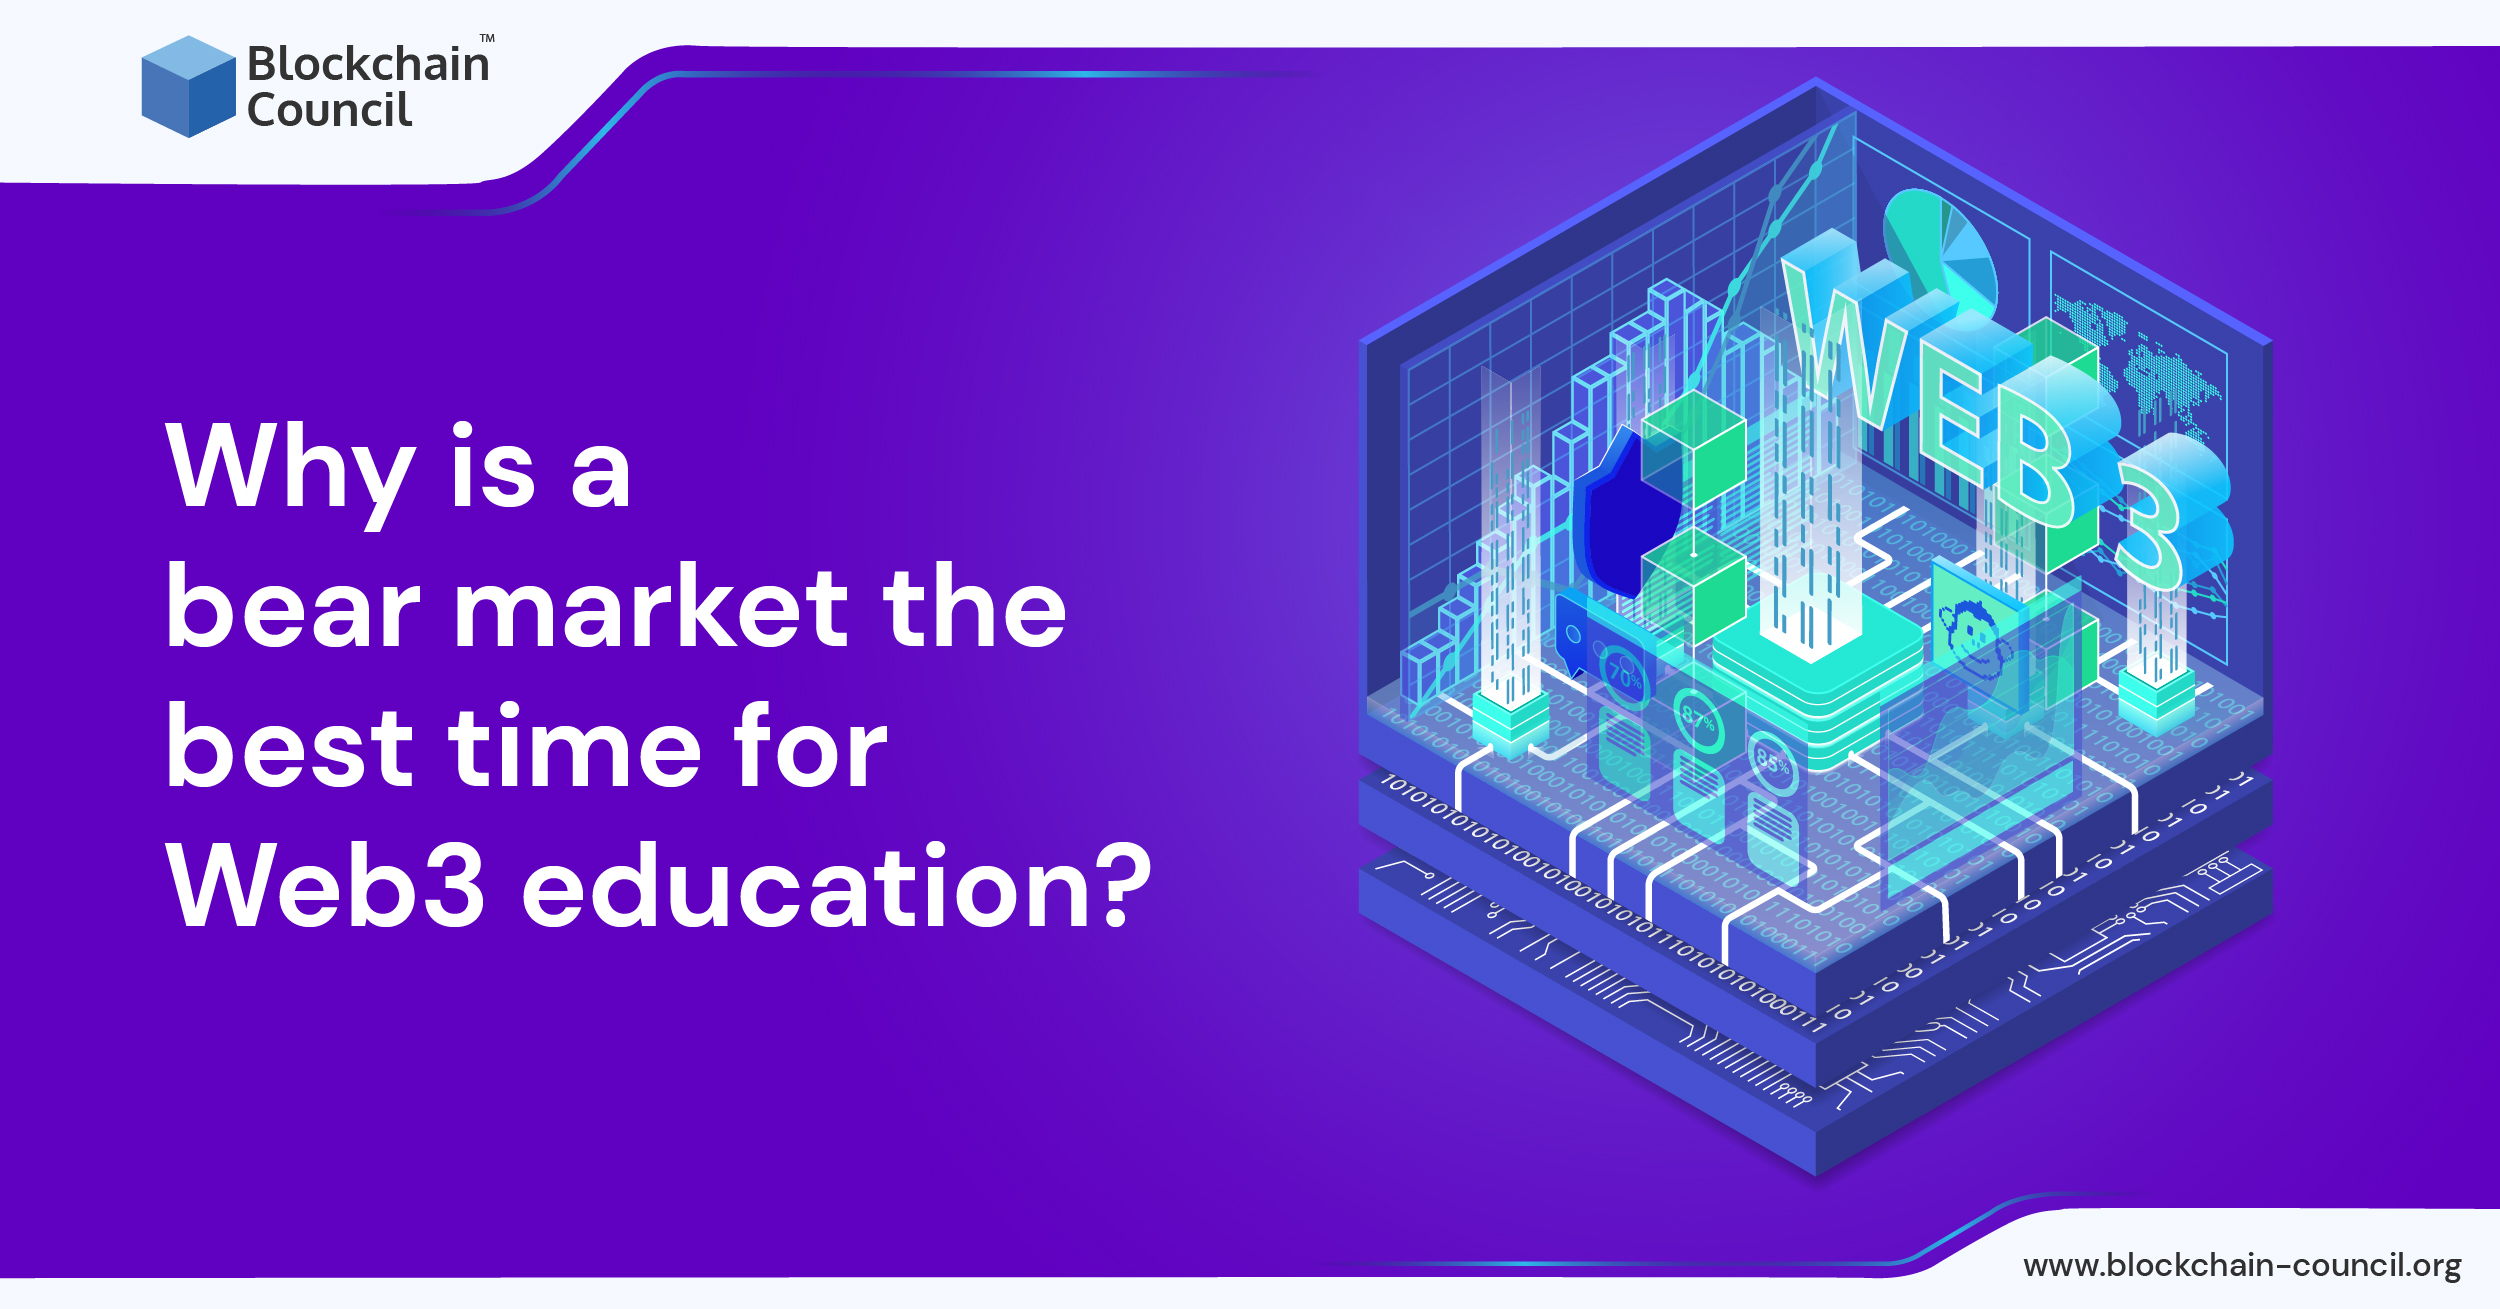 Why is a bear market the best time for Web3 education